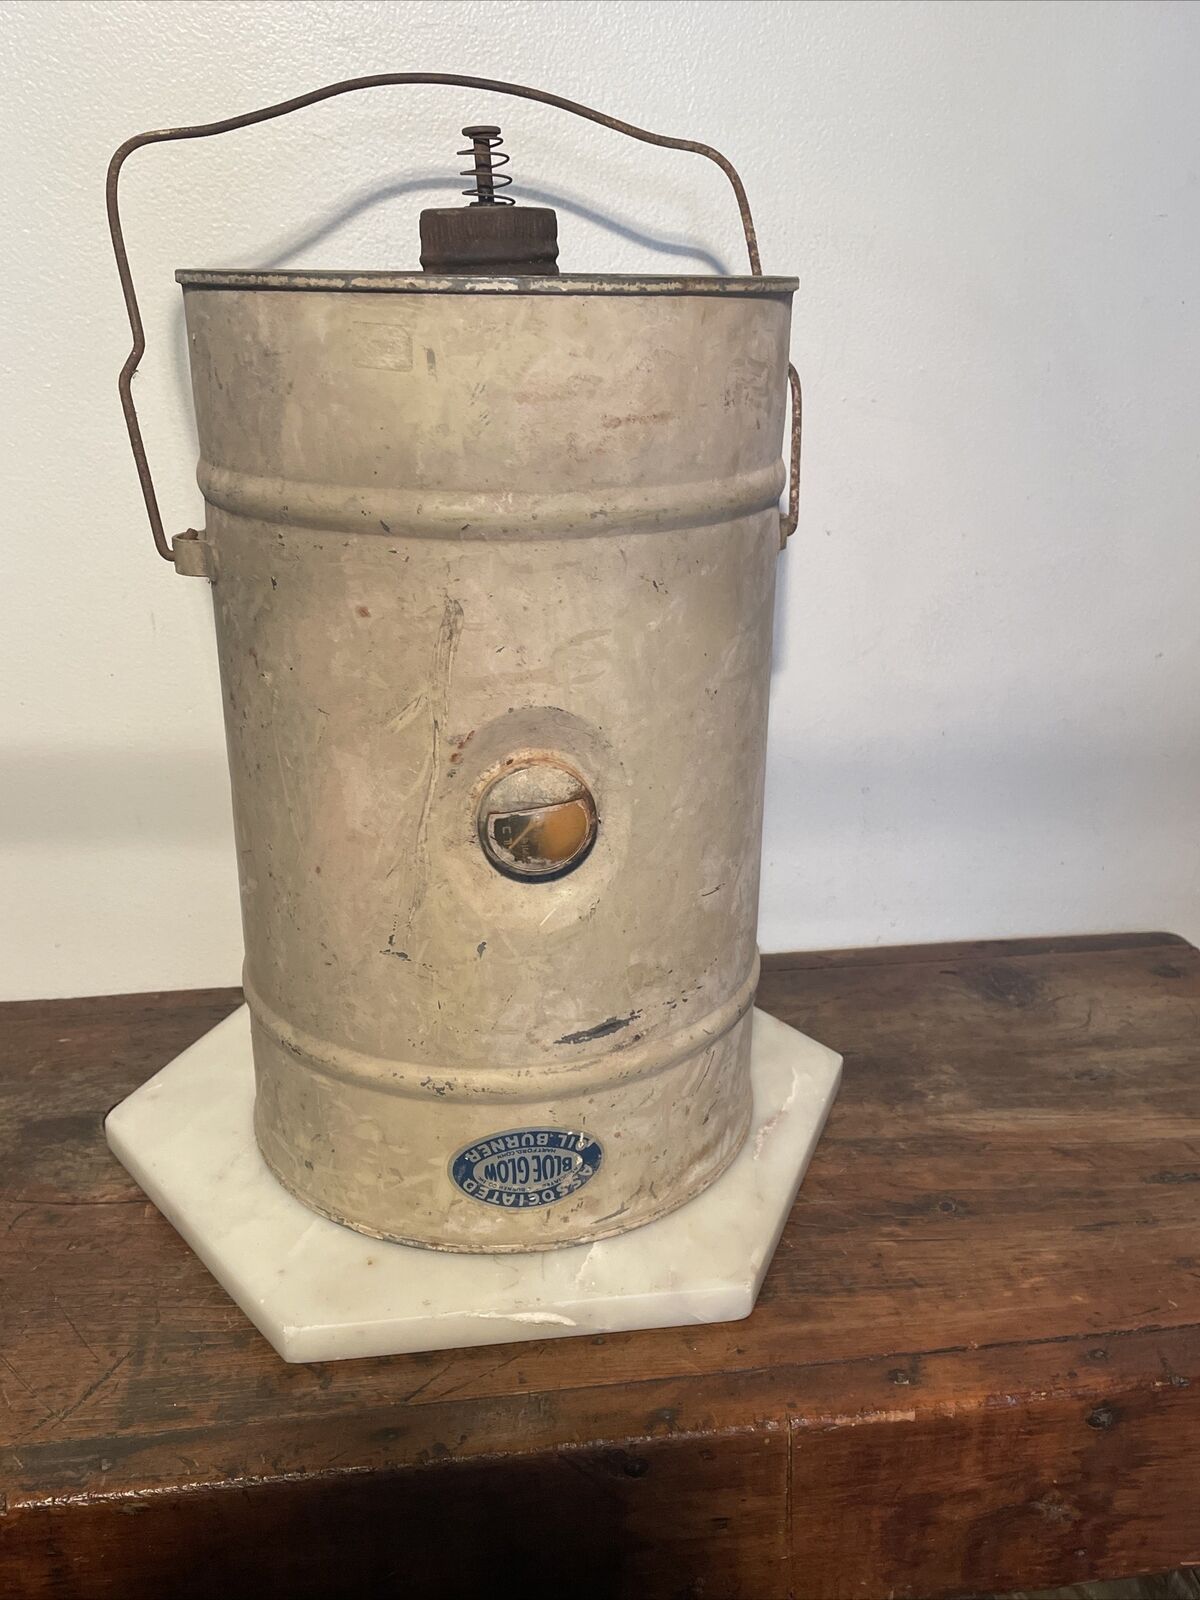 Rare Early Blue Glow Oil Burner Fuel Can For Re-filling Oil Lamps